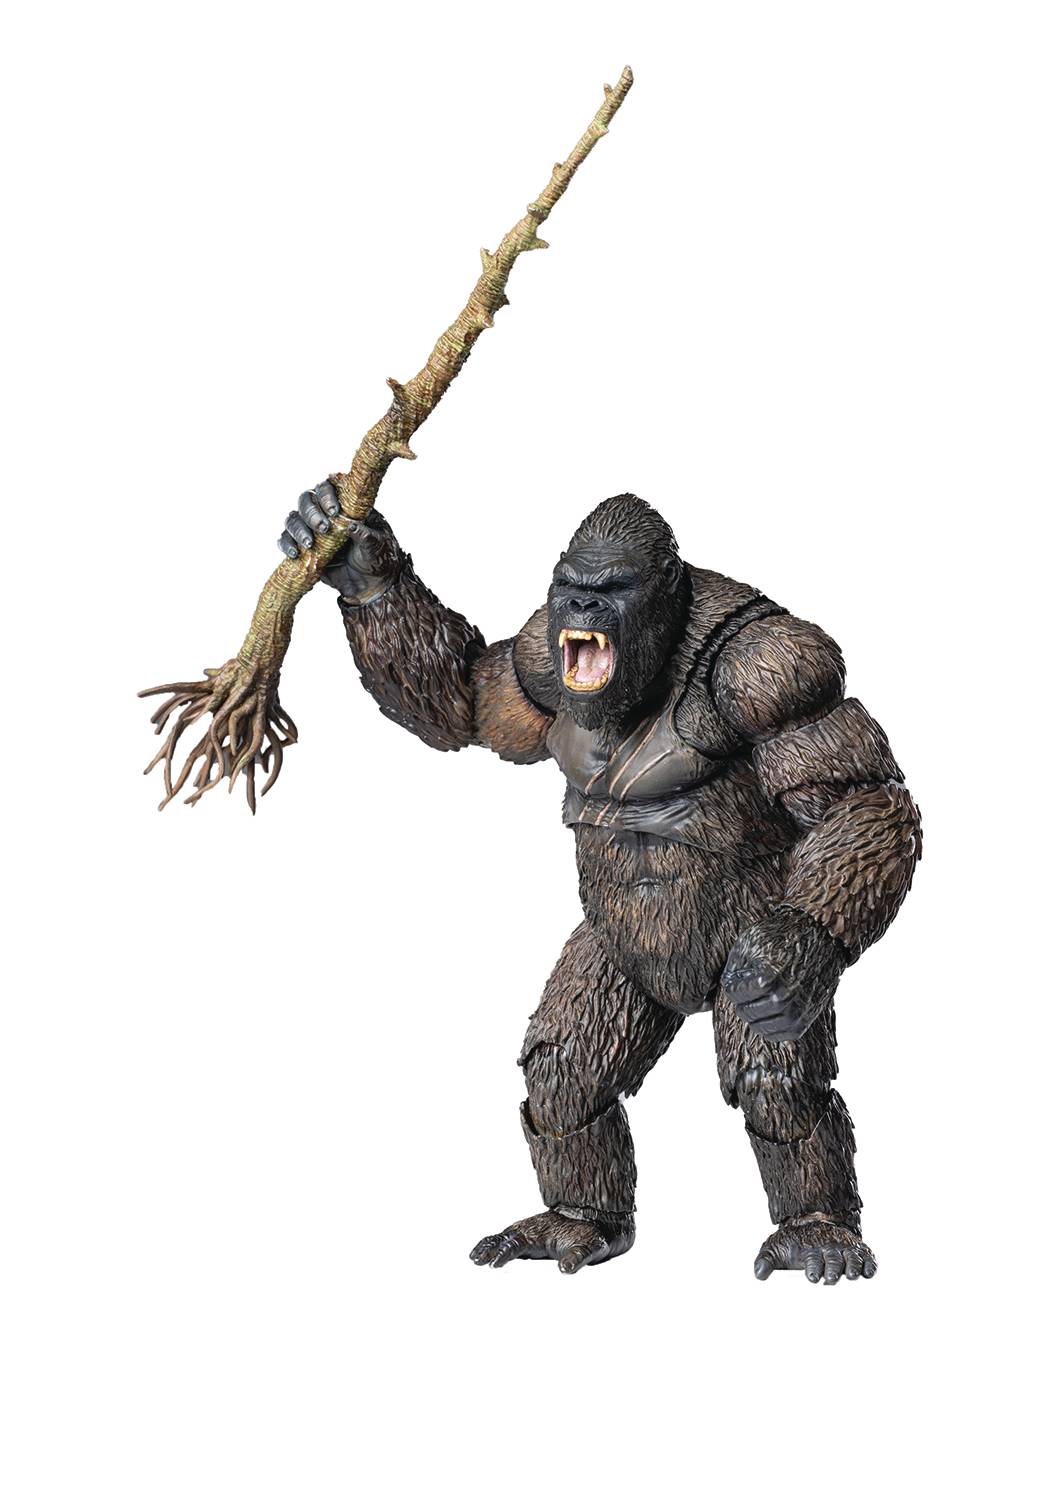 KONG SKULL ISLAND EXQUISITE BASIC KONG NON-SCALE PX AF (Net)